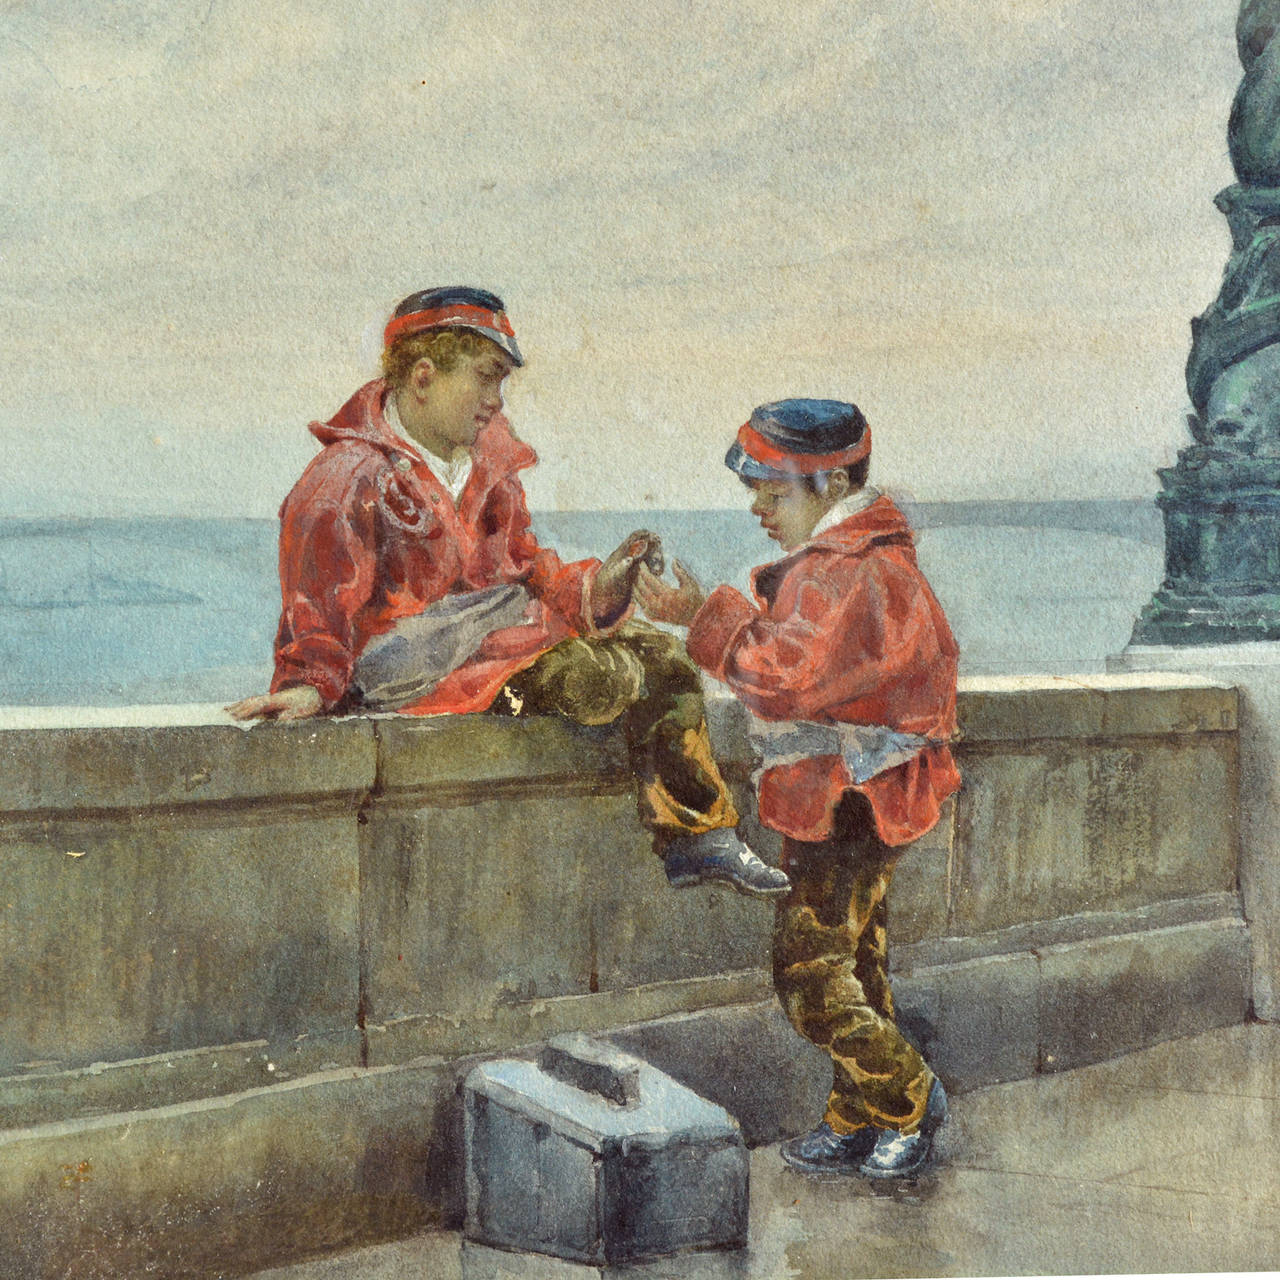 Shoeshine Boys on the Thames Embankment, 'Victorian Genre' watercolour by Andrew Carrick Gow

Available to view at Brunswick House, London.

Andrew Carrick Gow RA (1848-1920) was a British artist who painted military, historical, genre and